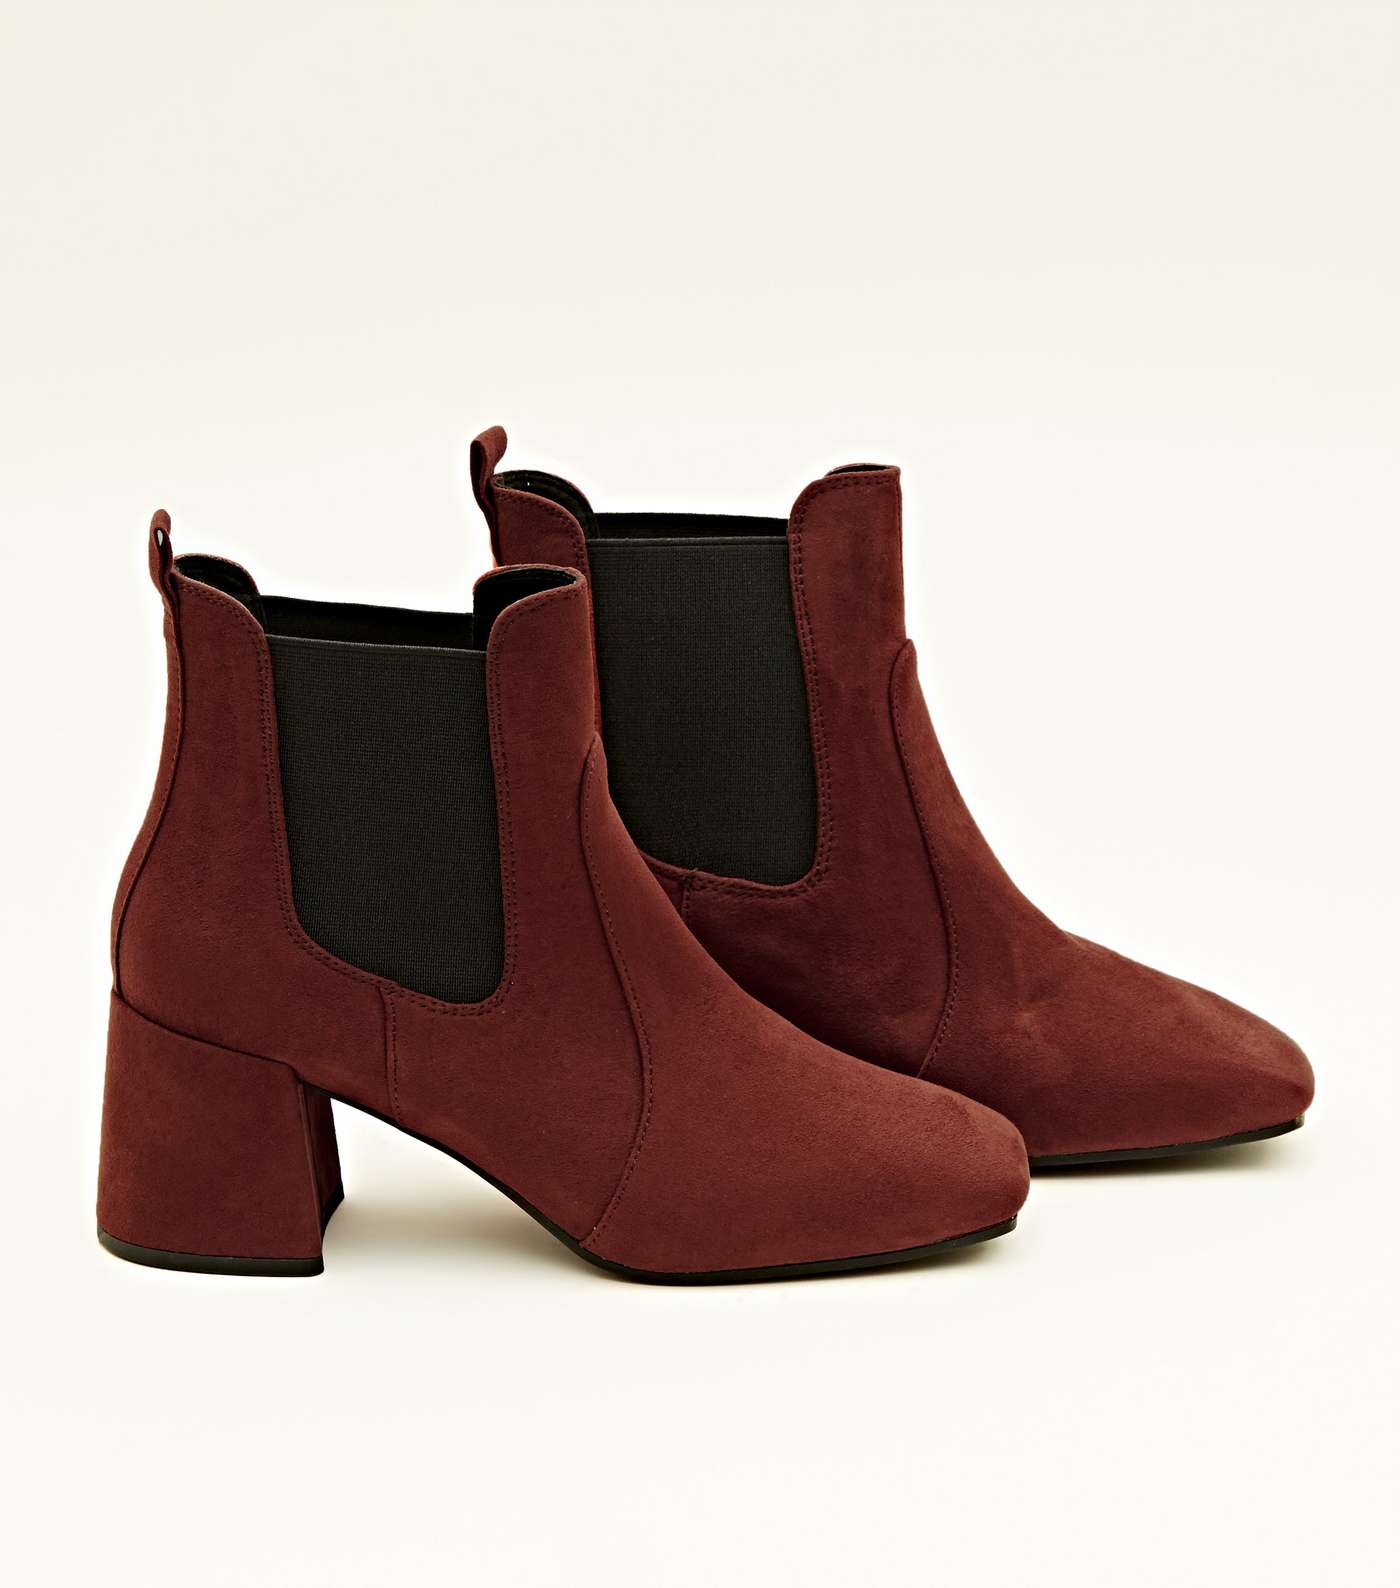 Rust Suedette Square Toe Heeled Chelsea Boots Image 3